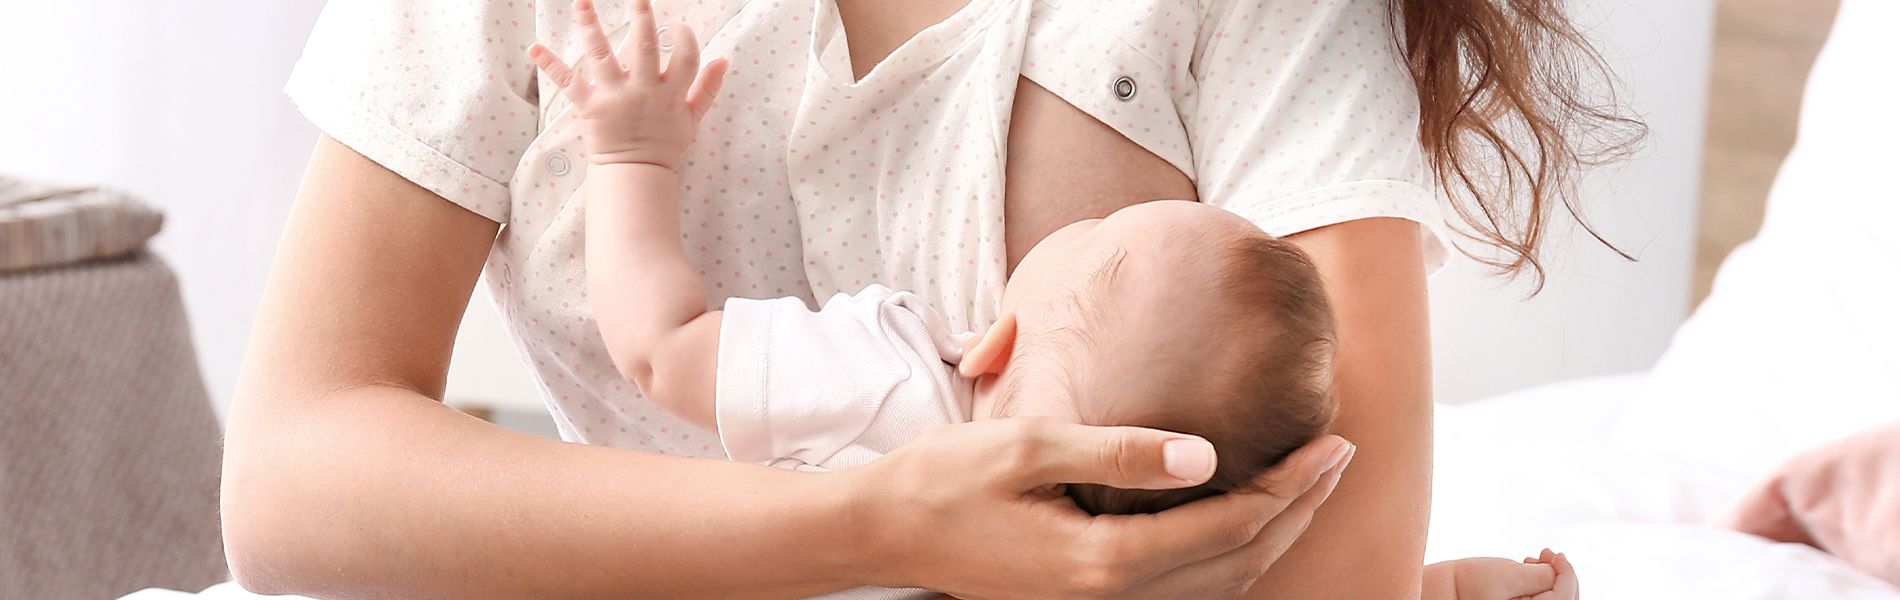 Nipple Care for Breastfeeding: Essential Tips for Healing and Prevention